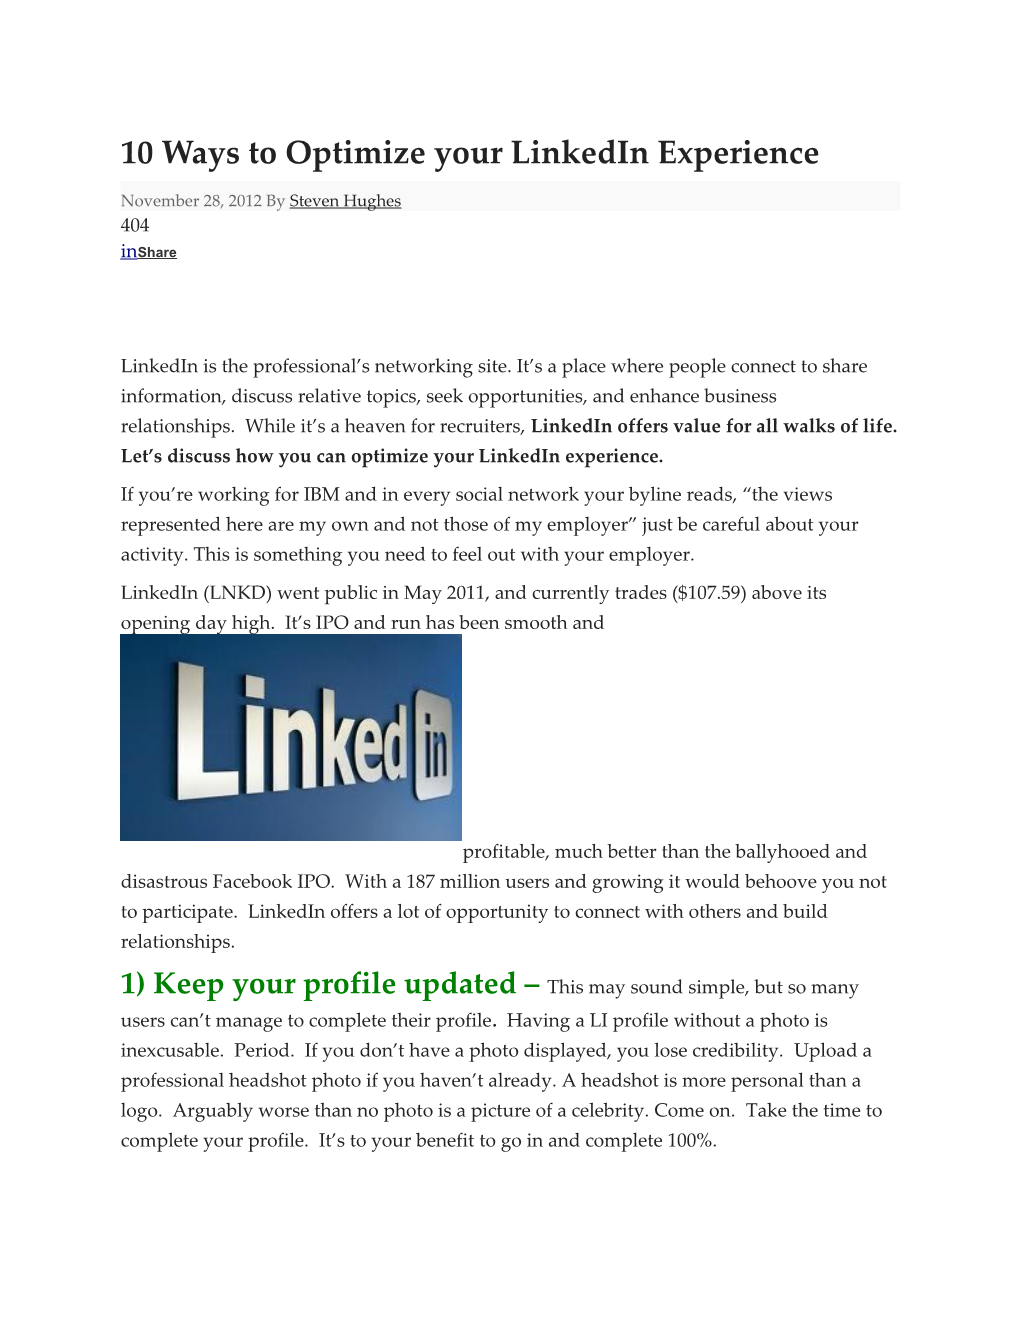 10 Ways to Optimize Your Linkedin Experience